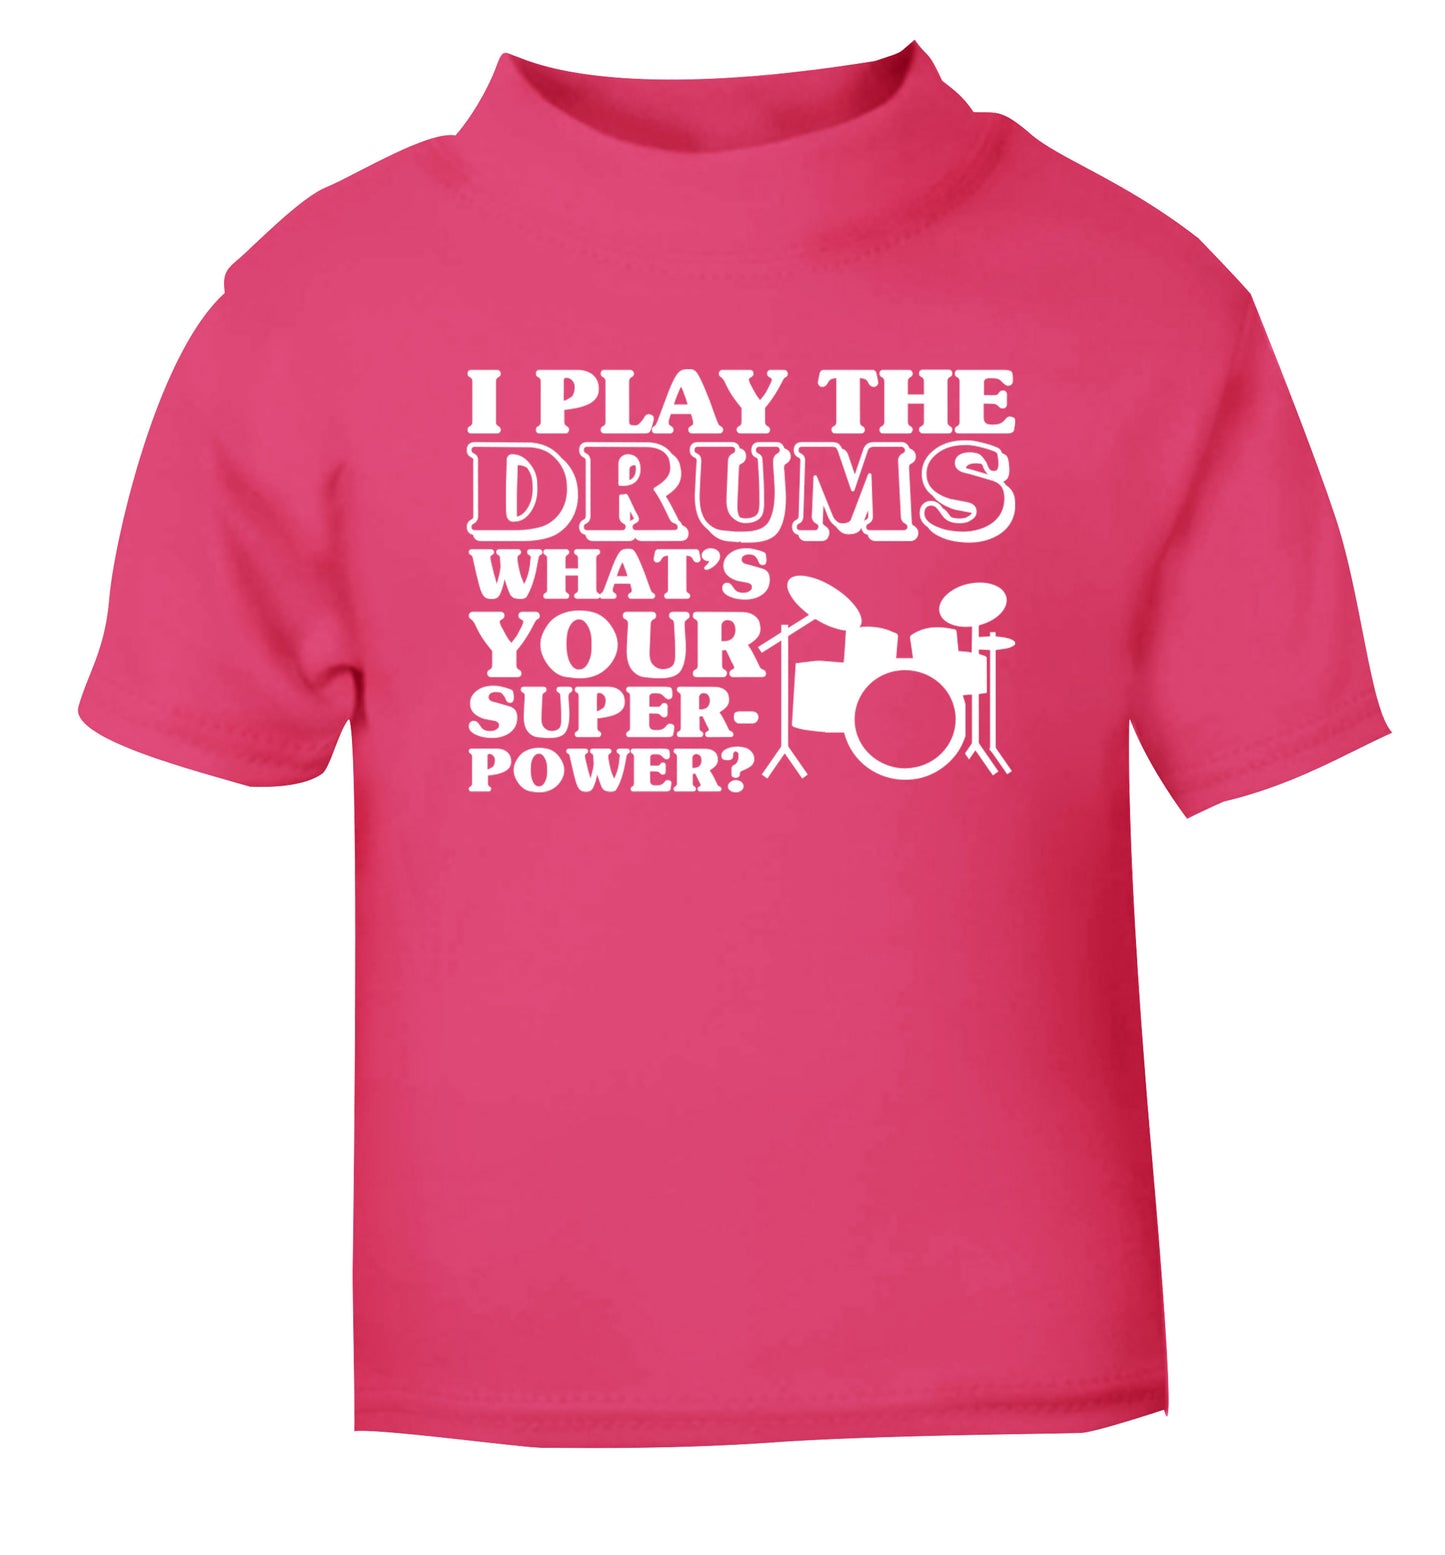 I play the drums what's your superpower? pink Baby Toddler Tshirt 2 Years